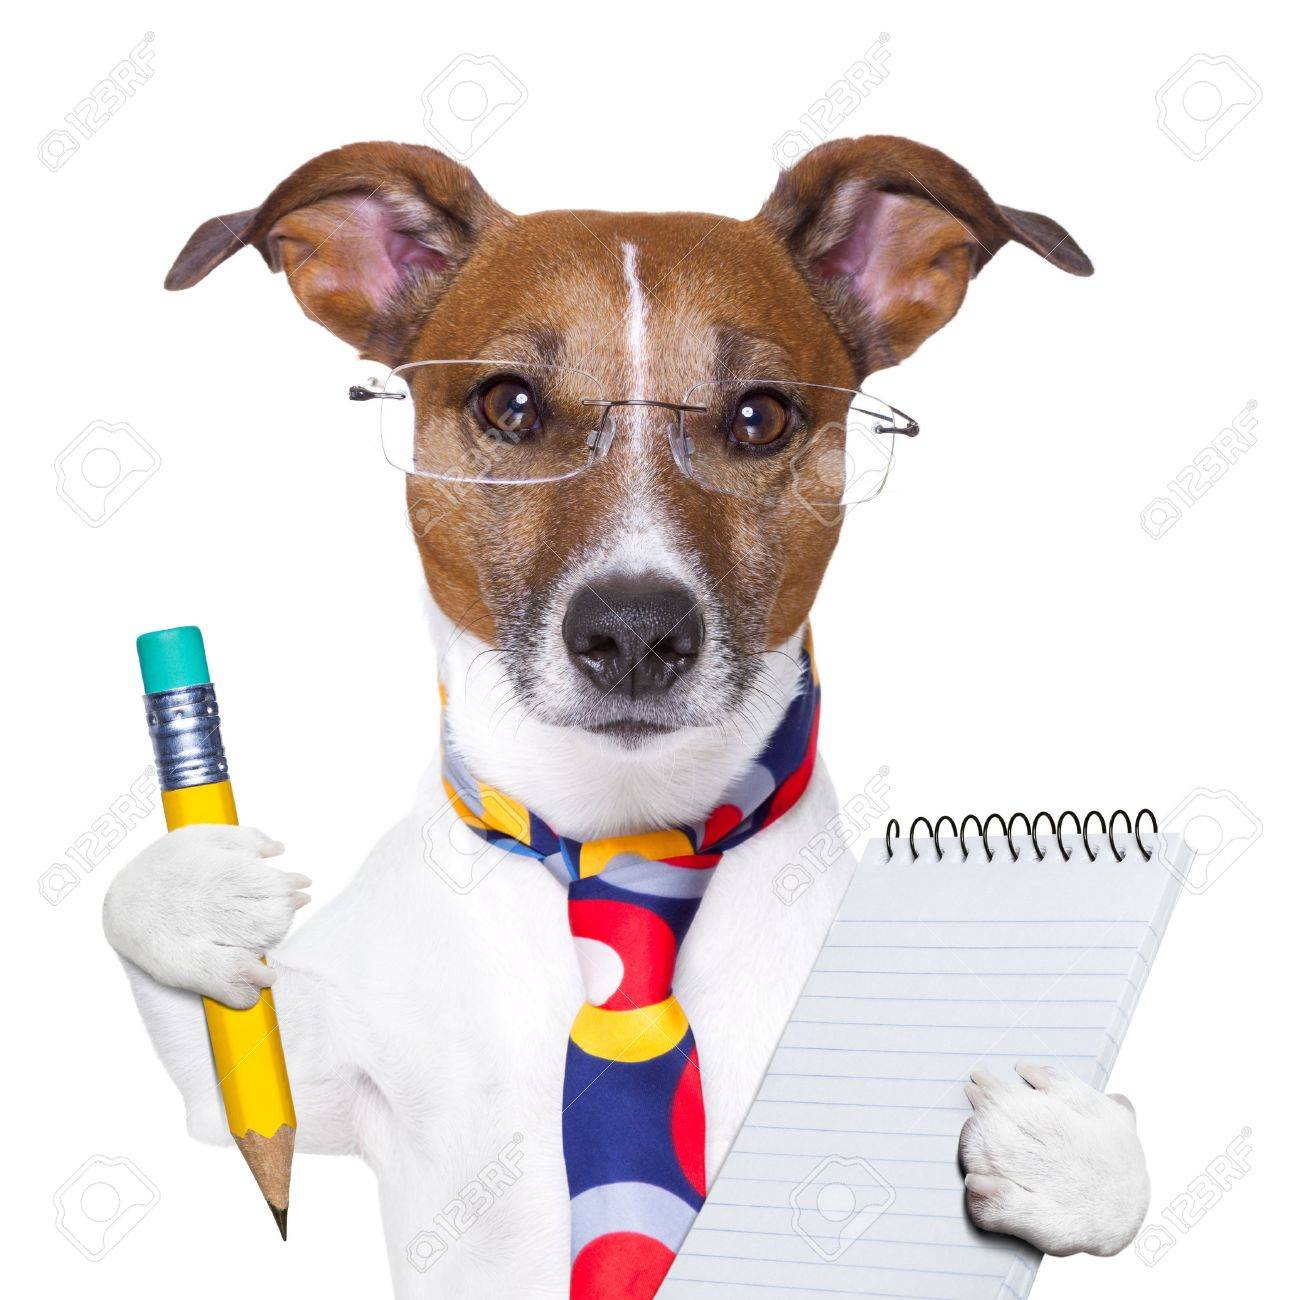 17610555-accountant-dog-with-pencil-and-notepad.jpg